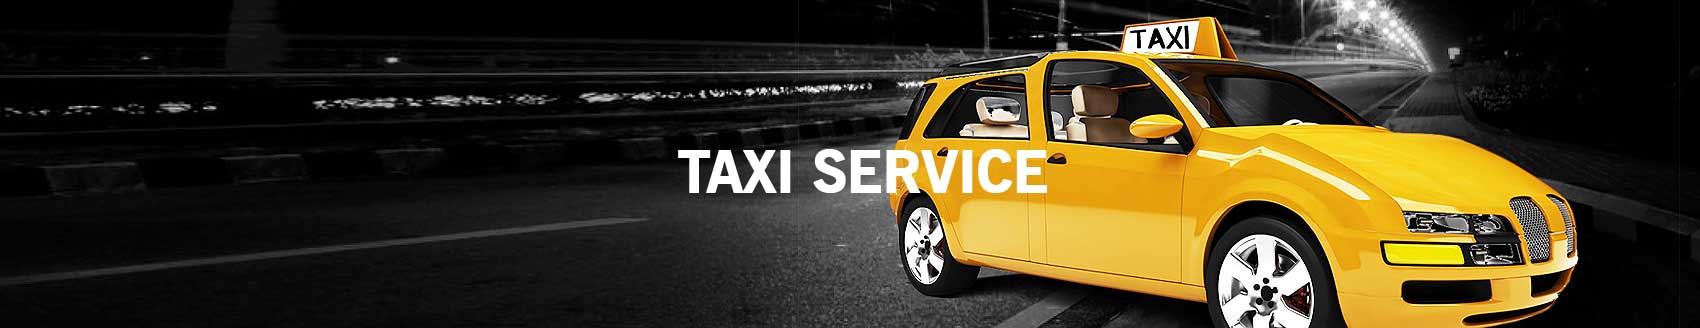 Northern Cabs , Chandigarh to Delhi, taxi, Trusted taxi Chandigarh to Delhi,taxi Chandigarh to Delhi, Chandigarh to Delhi taxi service ,affordable Chandigarh to Delhi taxi,one way, Chandigarh to Delhi taxi